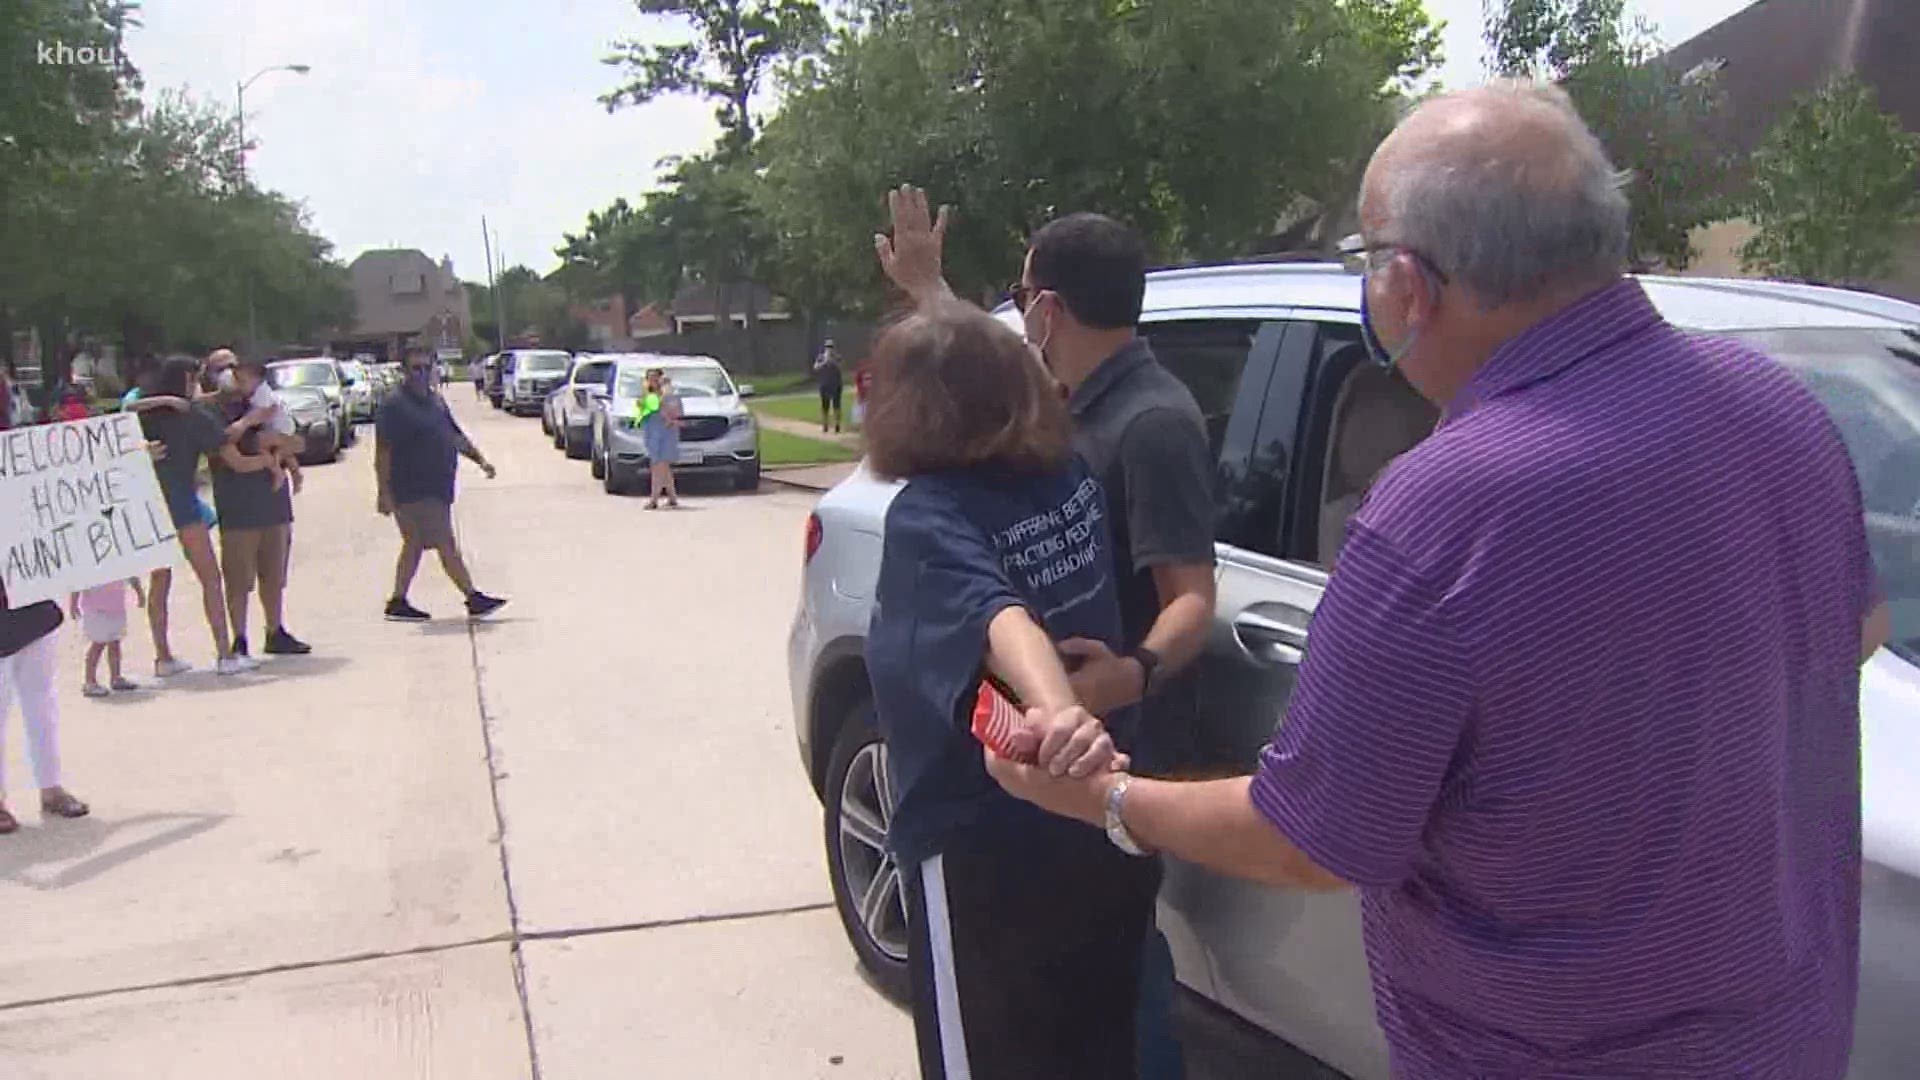 While many faces were masked, there was no hiding the excitement Friday as 68-year-old Belinda Galindo came home from the hospital after more than 50 days.